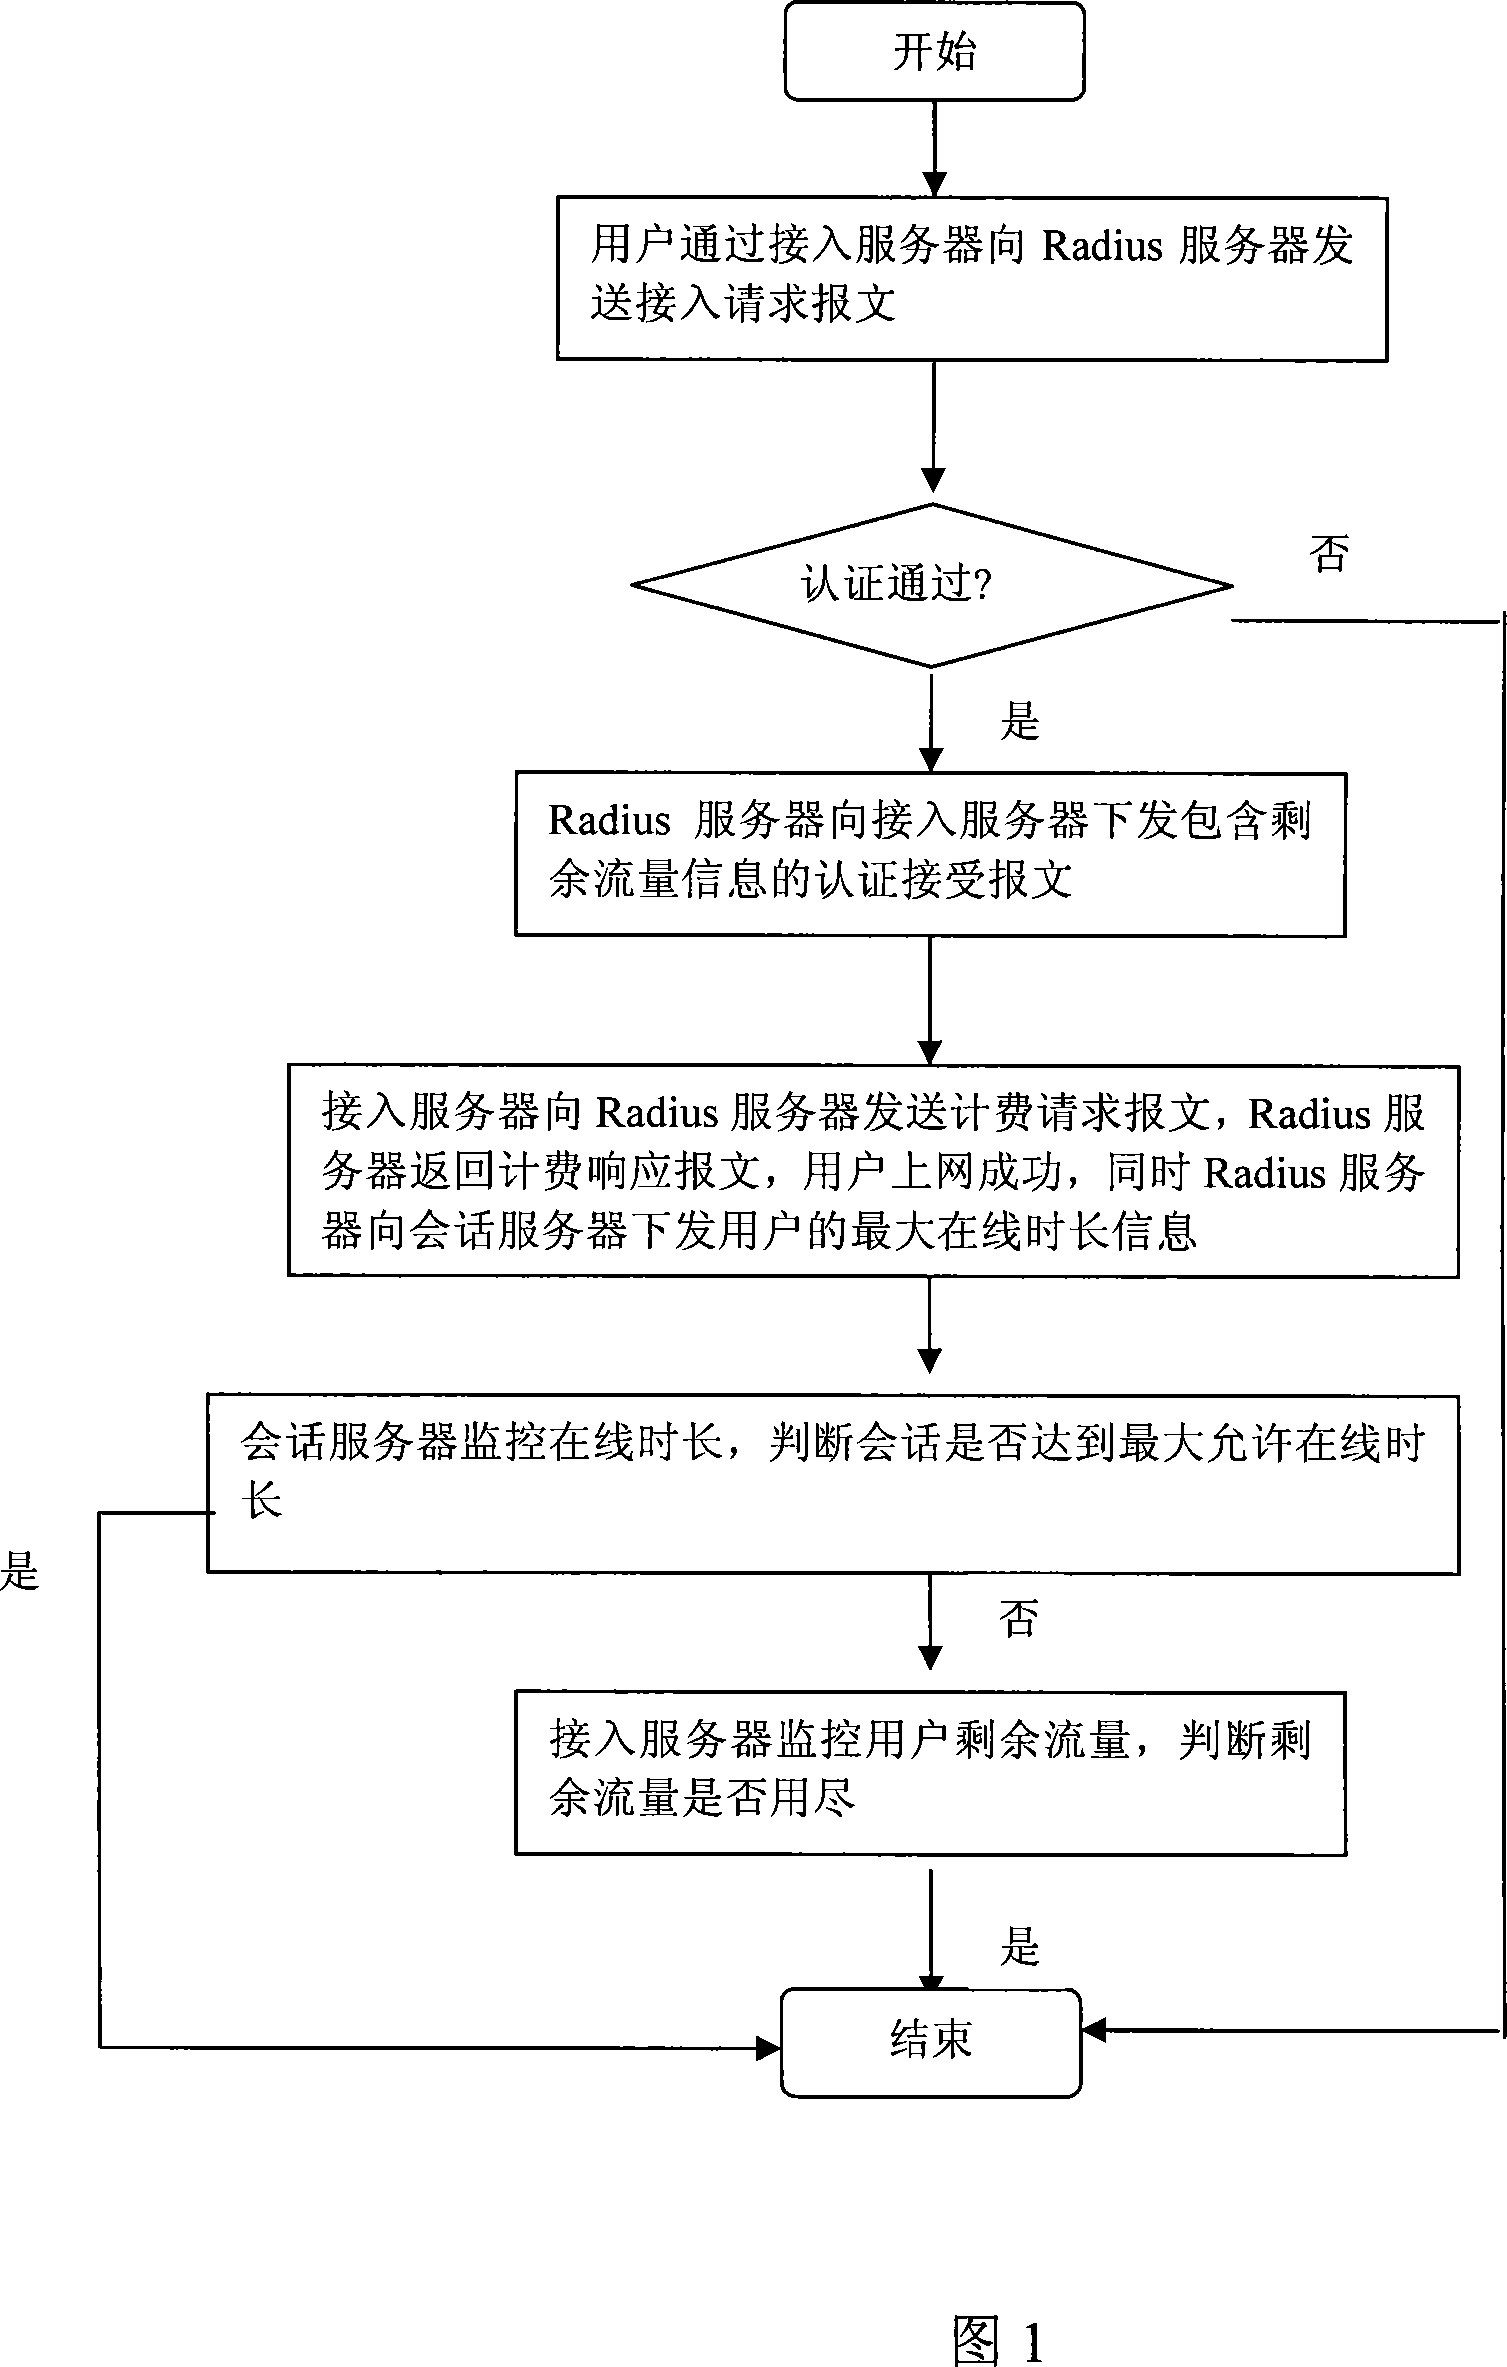 AAA service session access control system and method